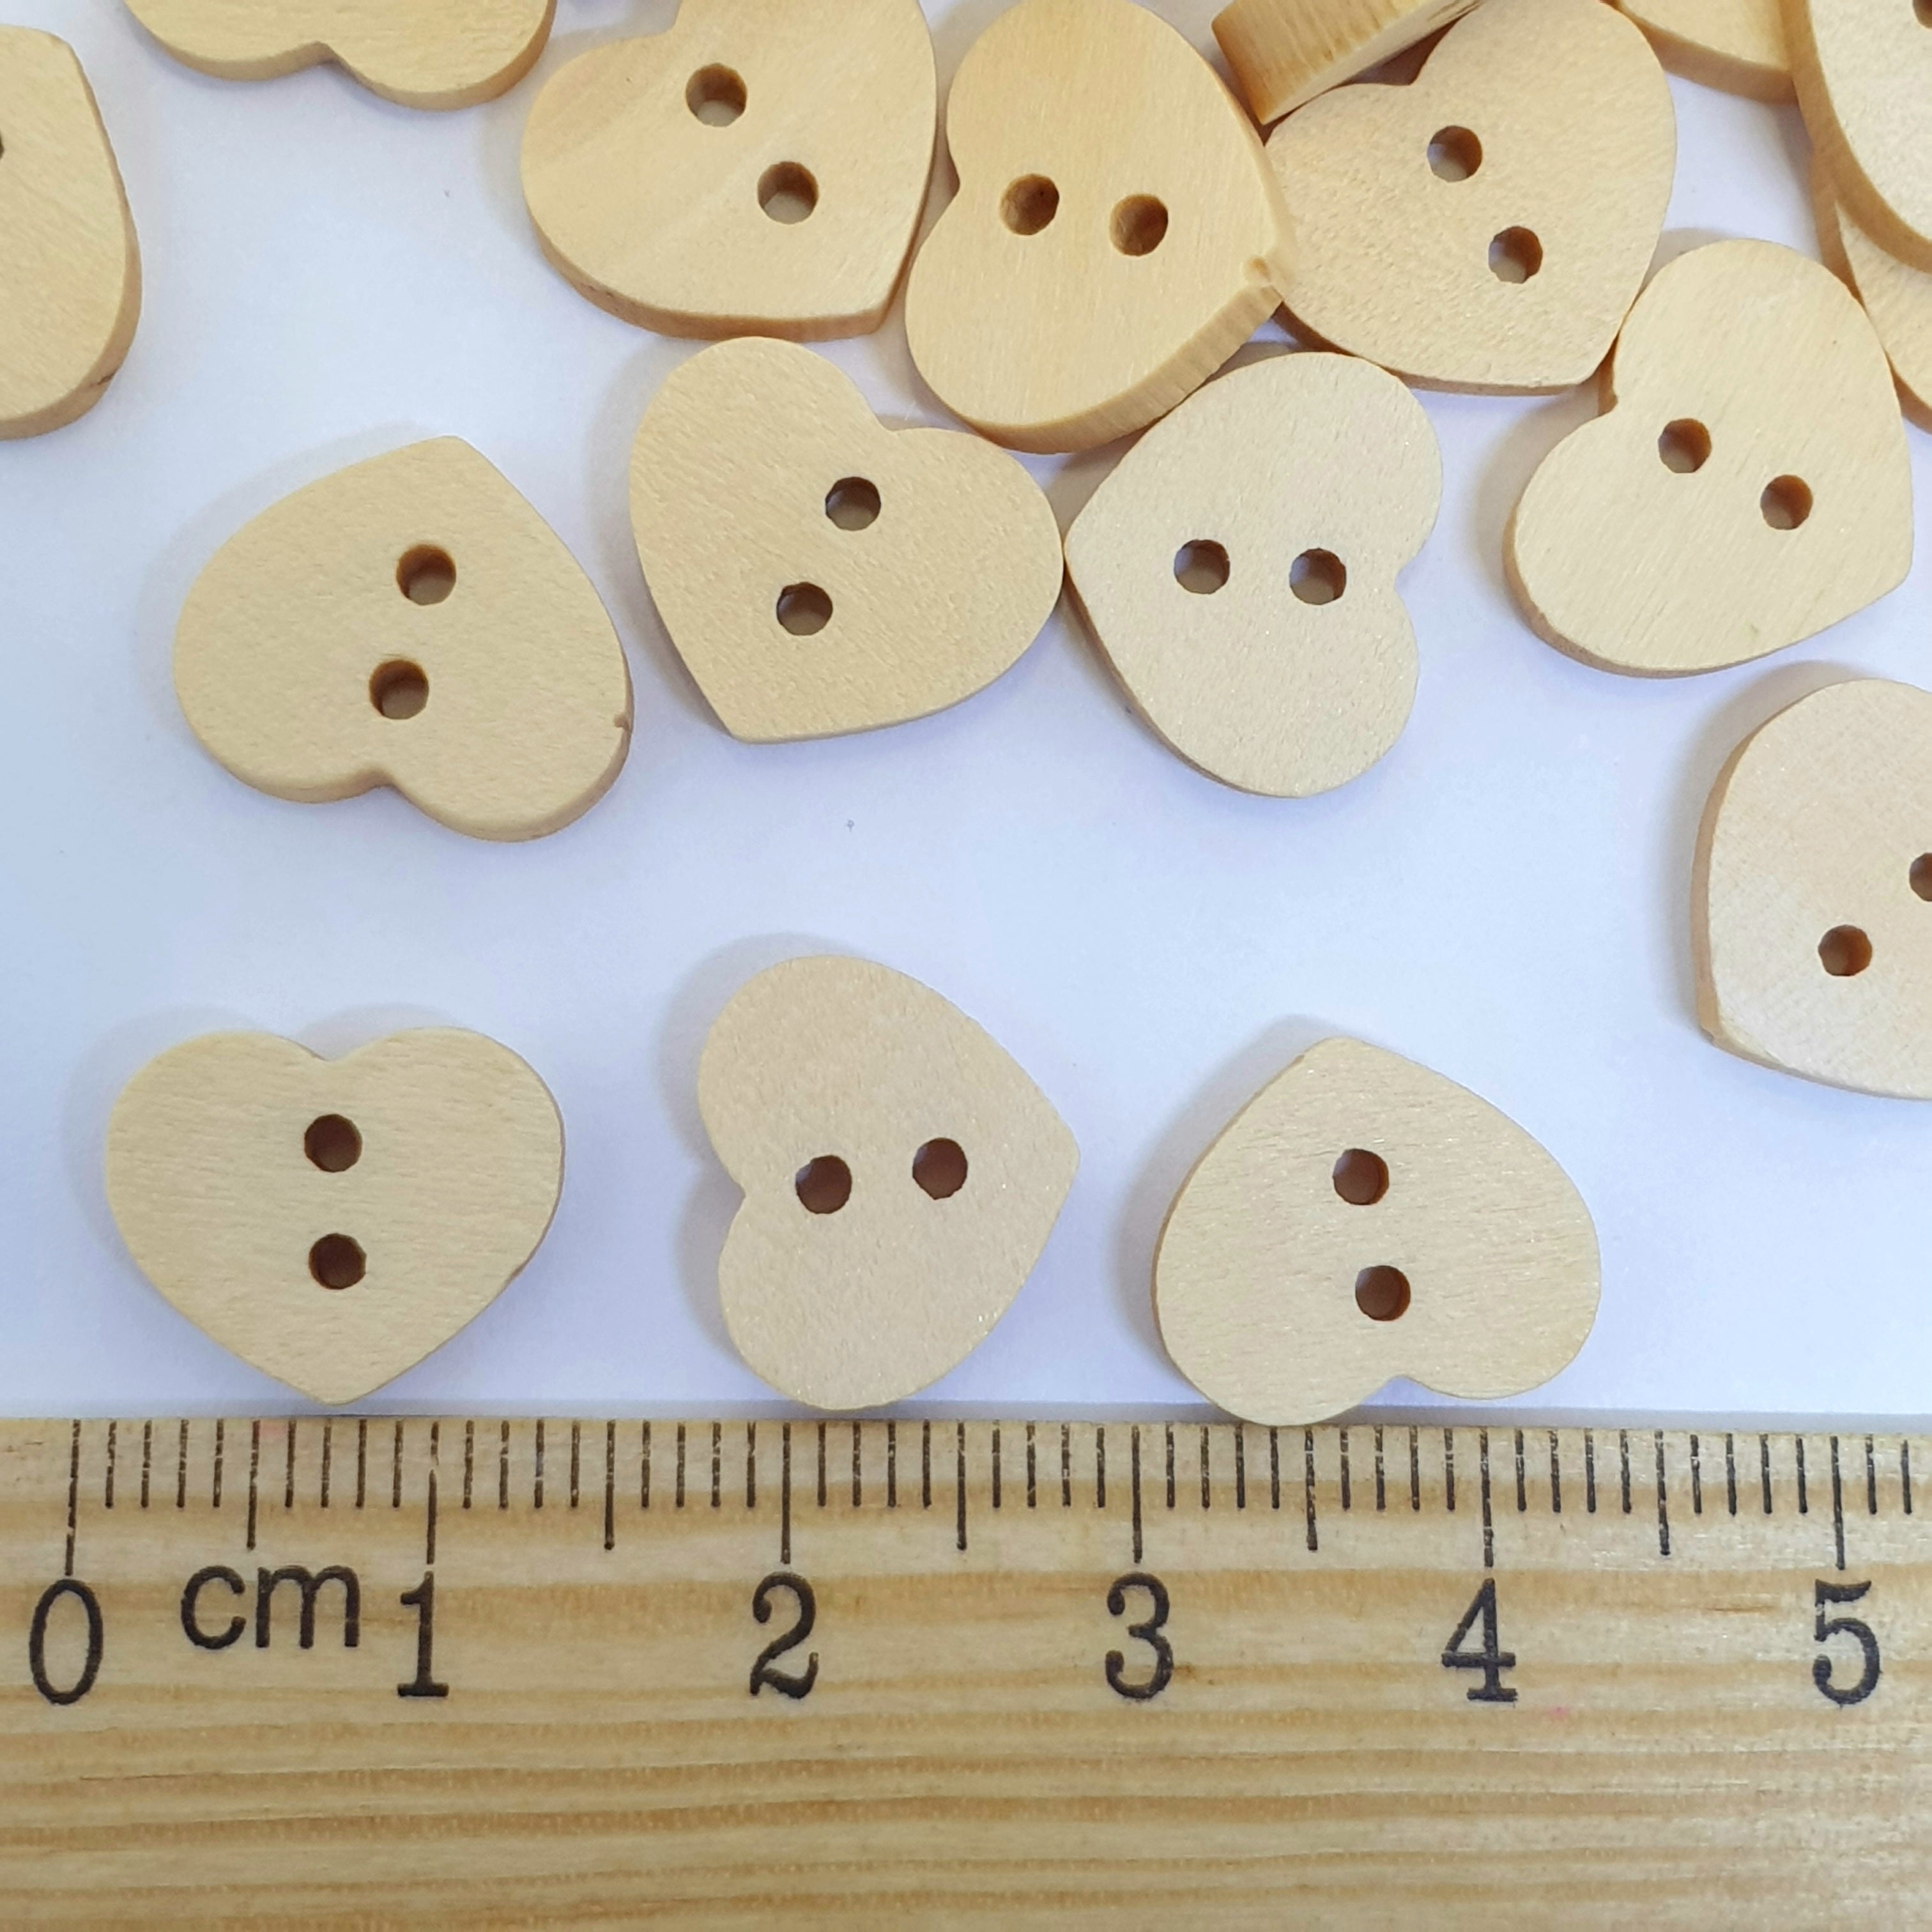 MajorCrafts 60pcs 13mm Light Brown 2 Holes Small Heart Wooden Sewing Buttons